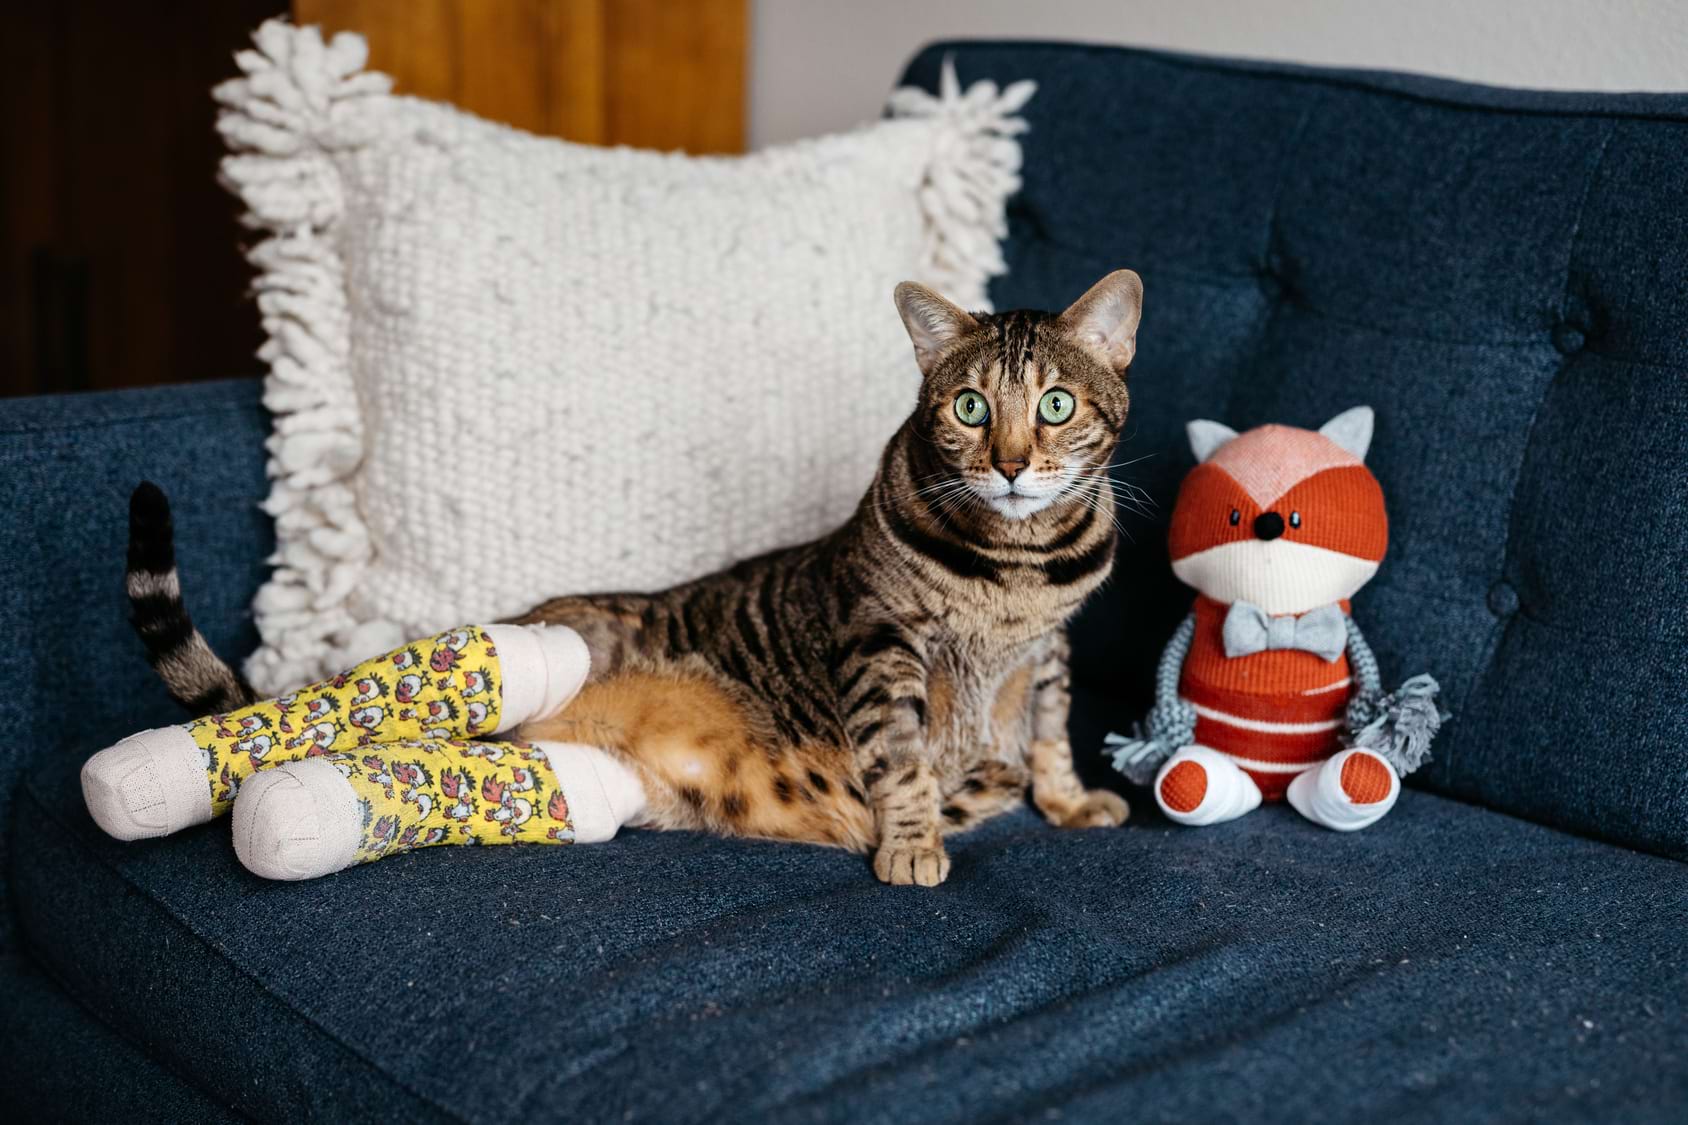 cat laying down with both legs in casts